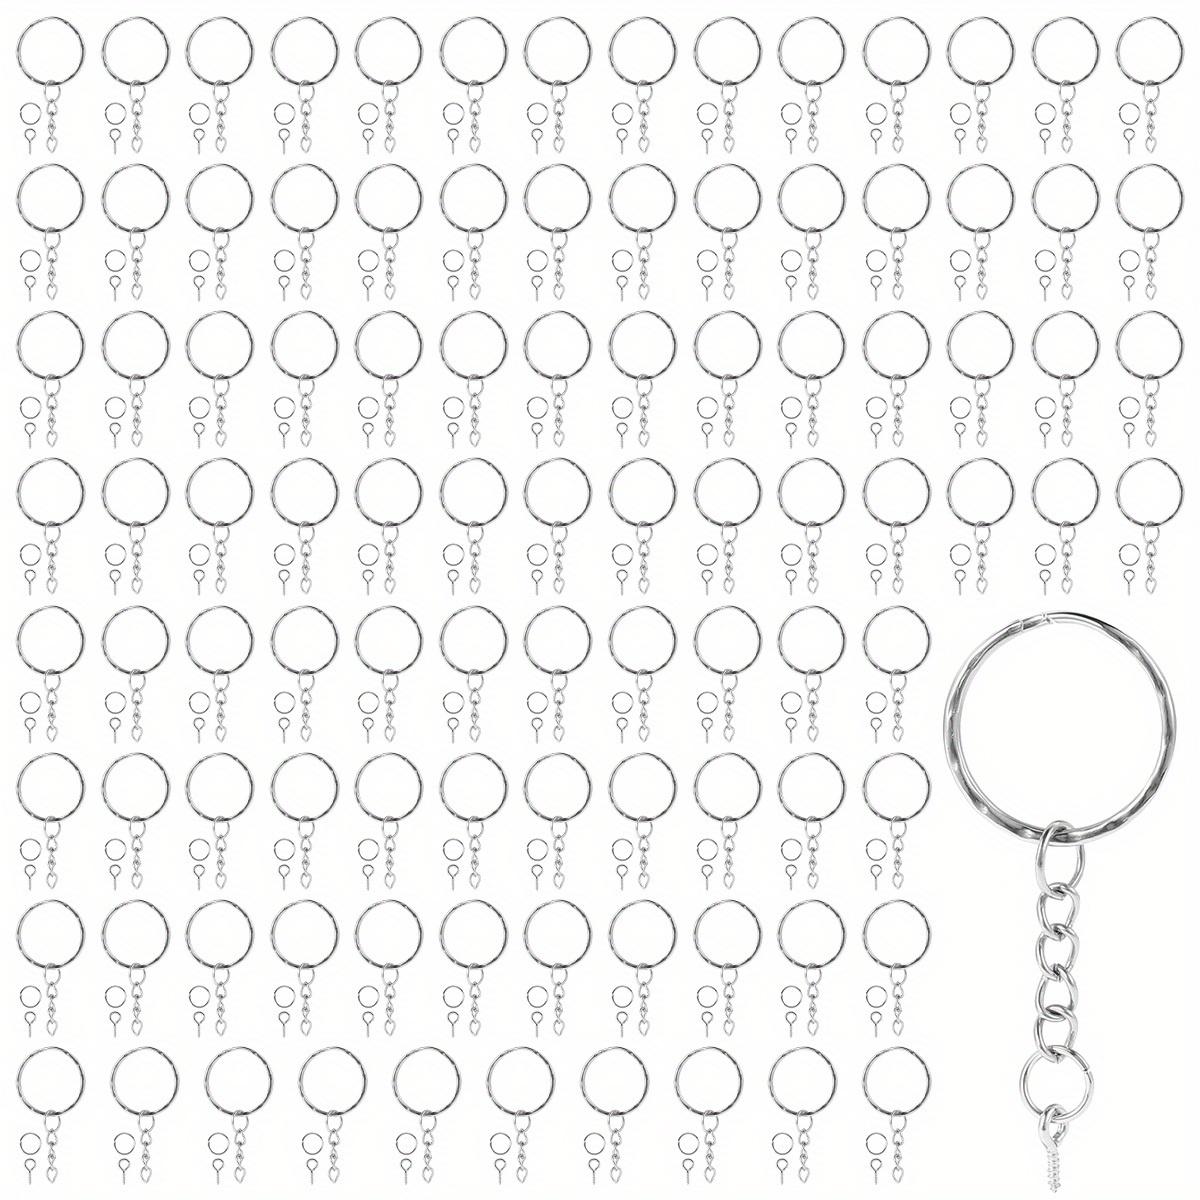 Suuchh Double Loops Split Rings, 10mm Small Round Key Ring Parts for DIY Crafts Making, Silver Tone 120pcs, Women's